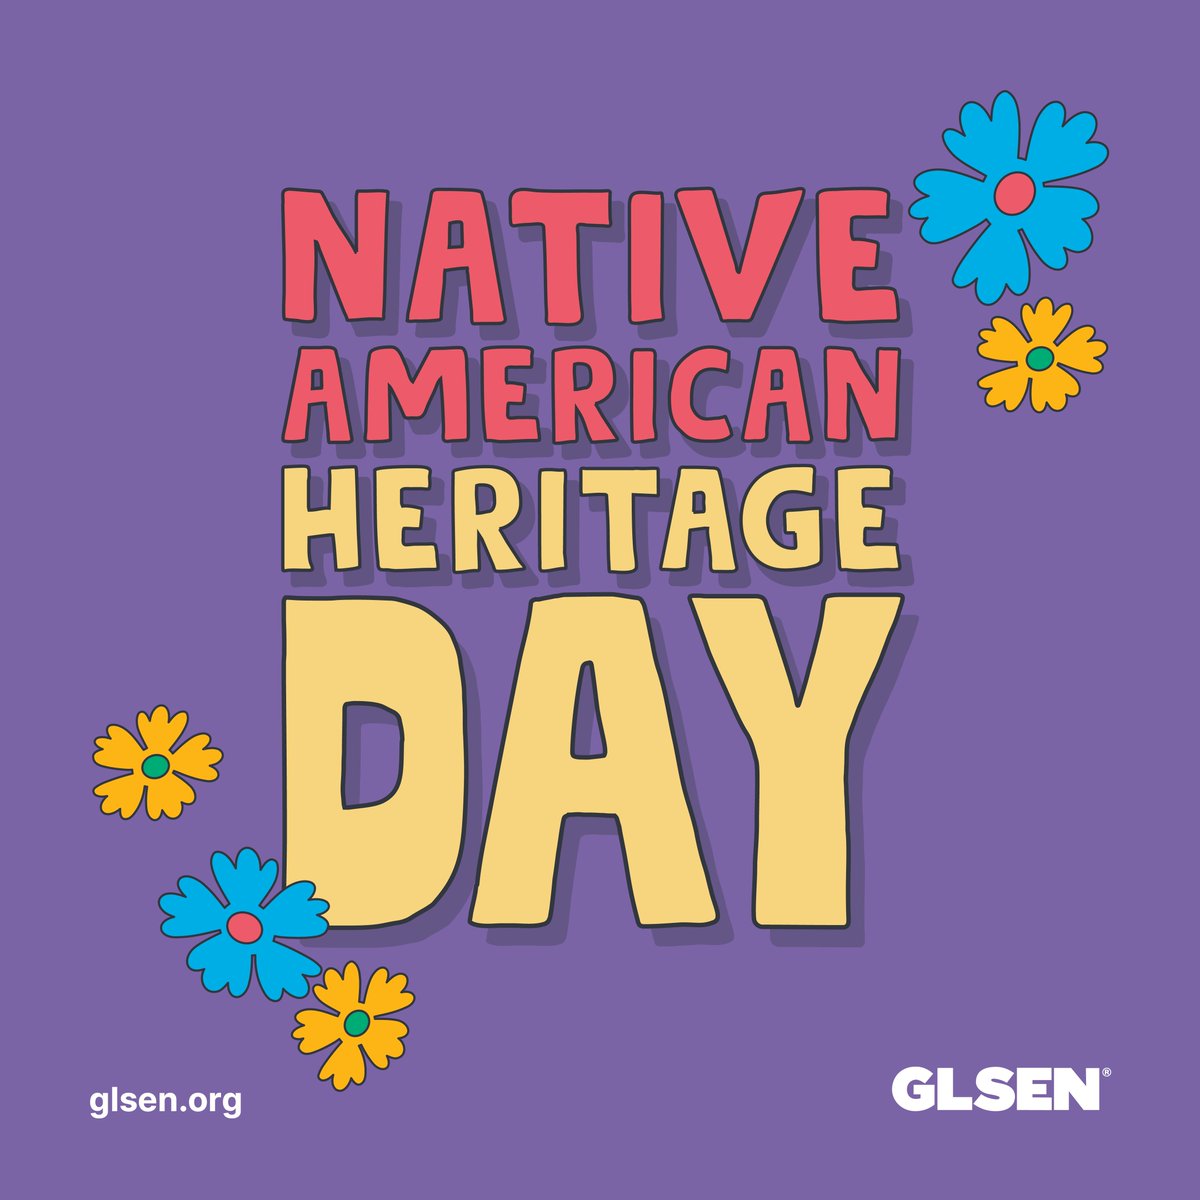 Today we celebrate Indigenous peoples past and present. ➡️ Visit glsen.us/3tVPWj5 to download a Native American Heritage Month Timeline. This timeline can help students better understand the historical context of LGBT/Two-Spirit Native American people in the U.S